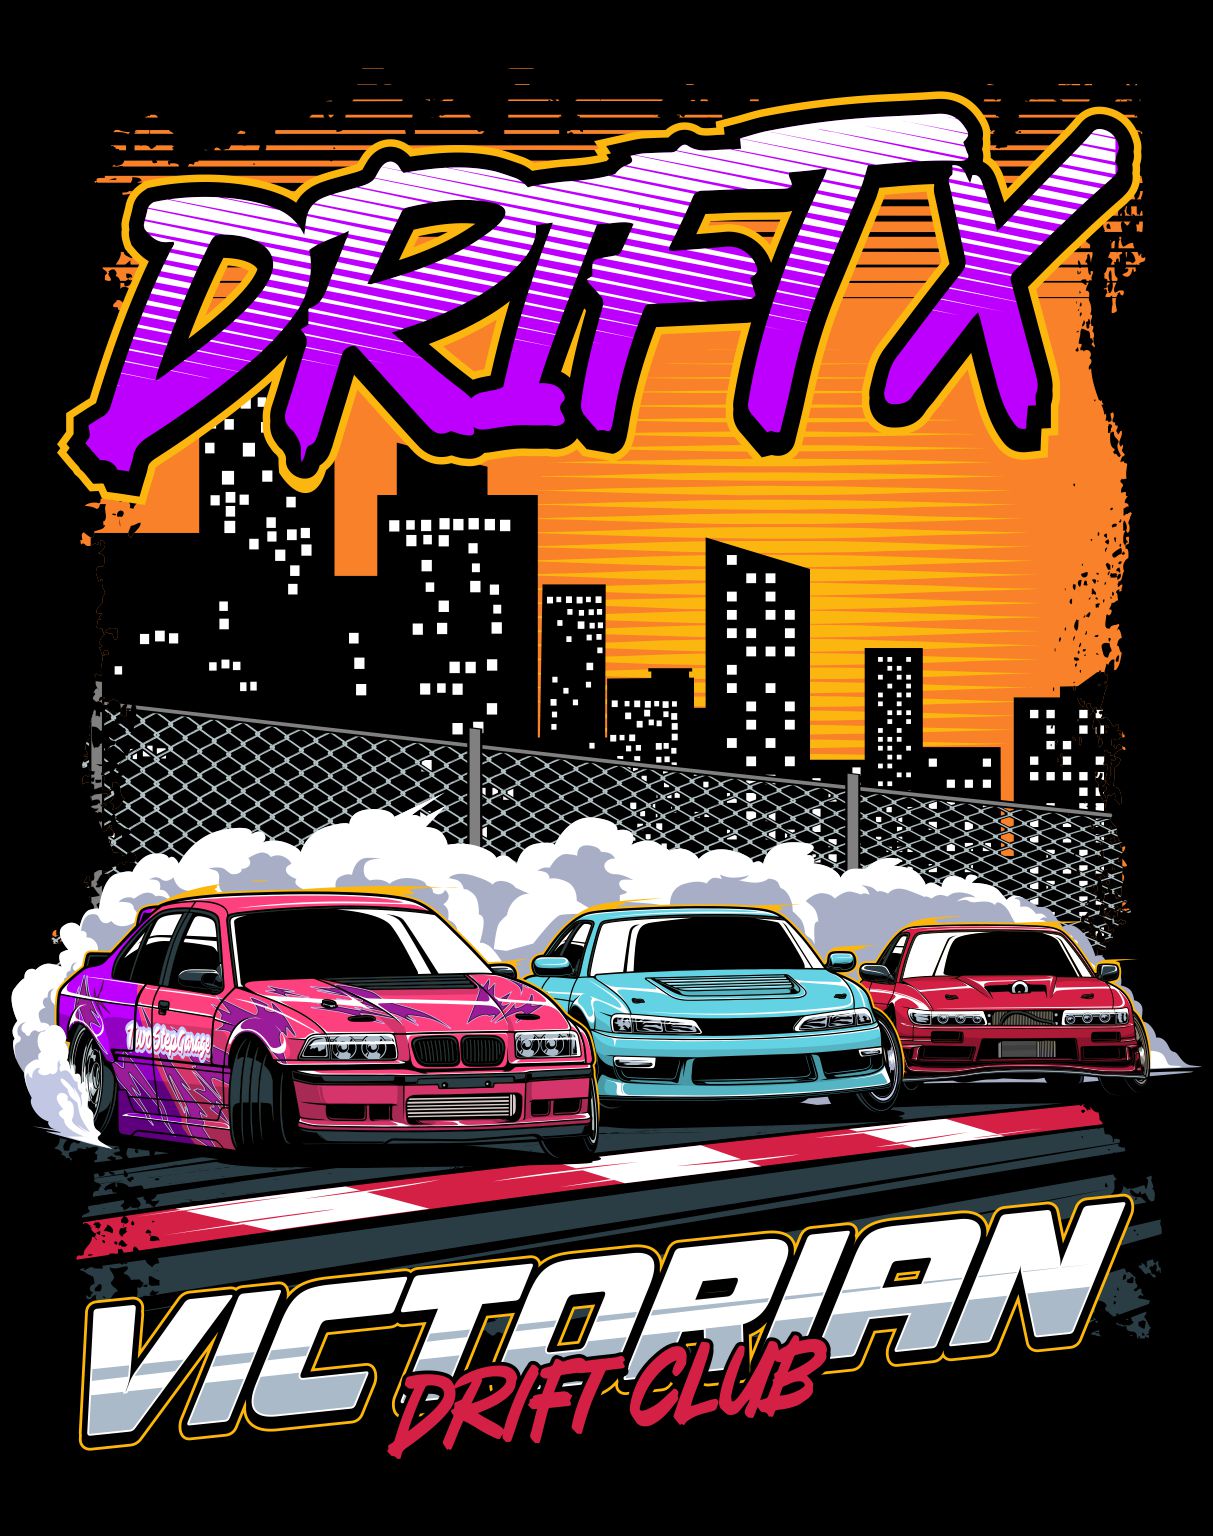 VicDrift Drift X shirts limited edition - tandem design - PRE ORDER for pickup at drift X